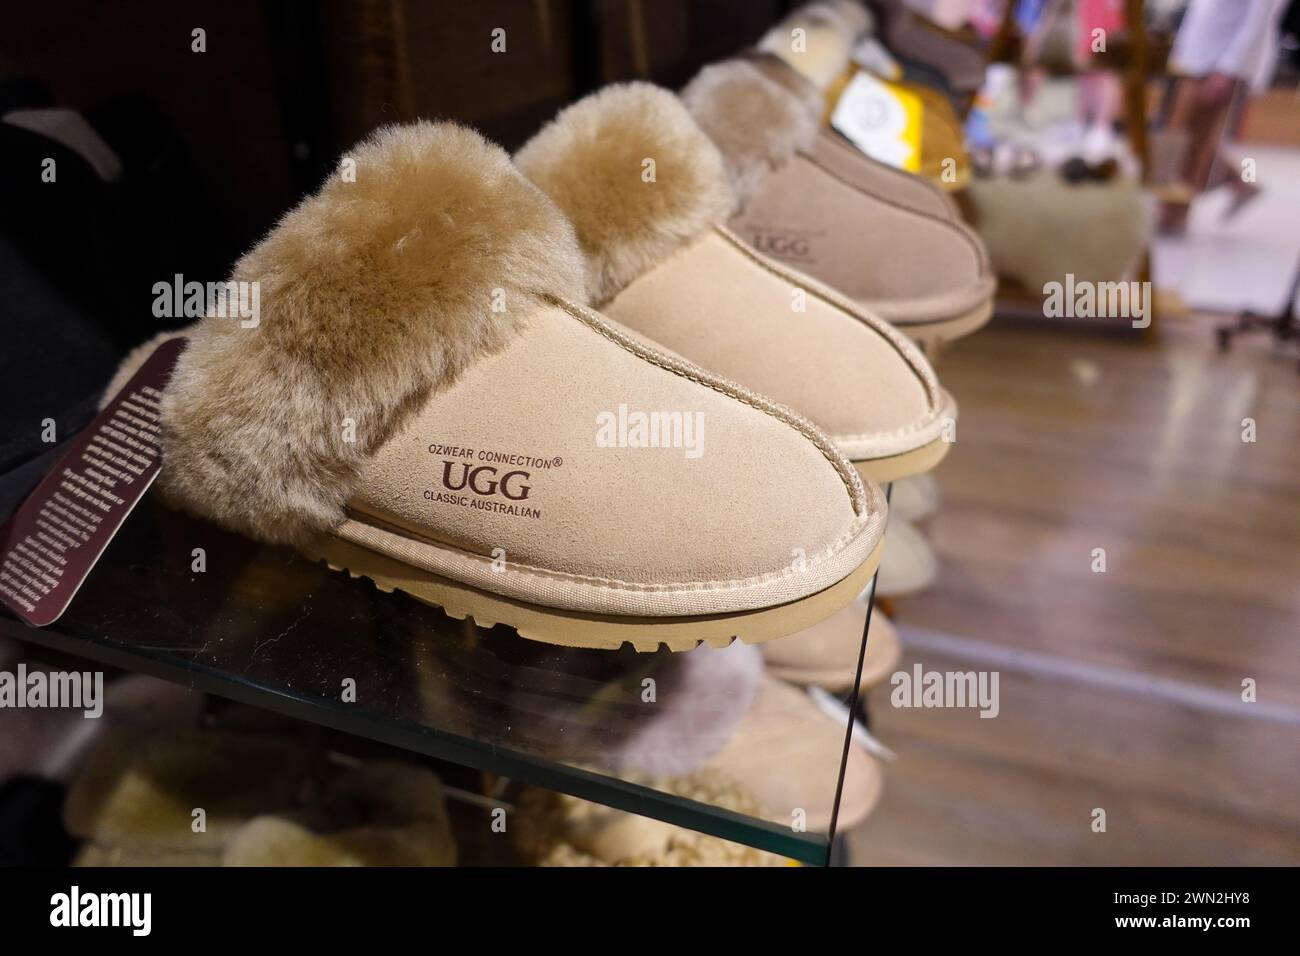 UGG Australia is a renowned brand, famous for its sheepskin boots. Founded in 1978 by Australian surfer Brian Smith in Santa Monica, California, UGG A Stock Photo